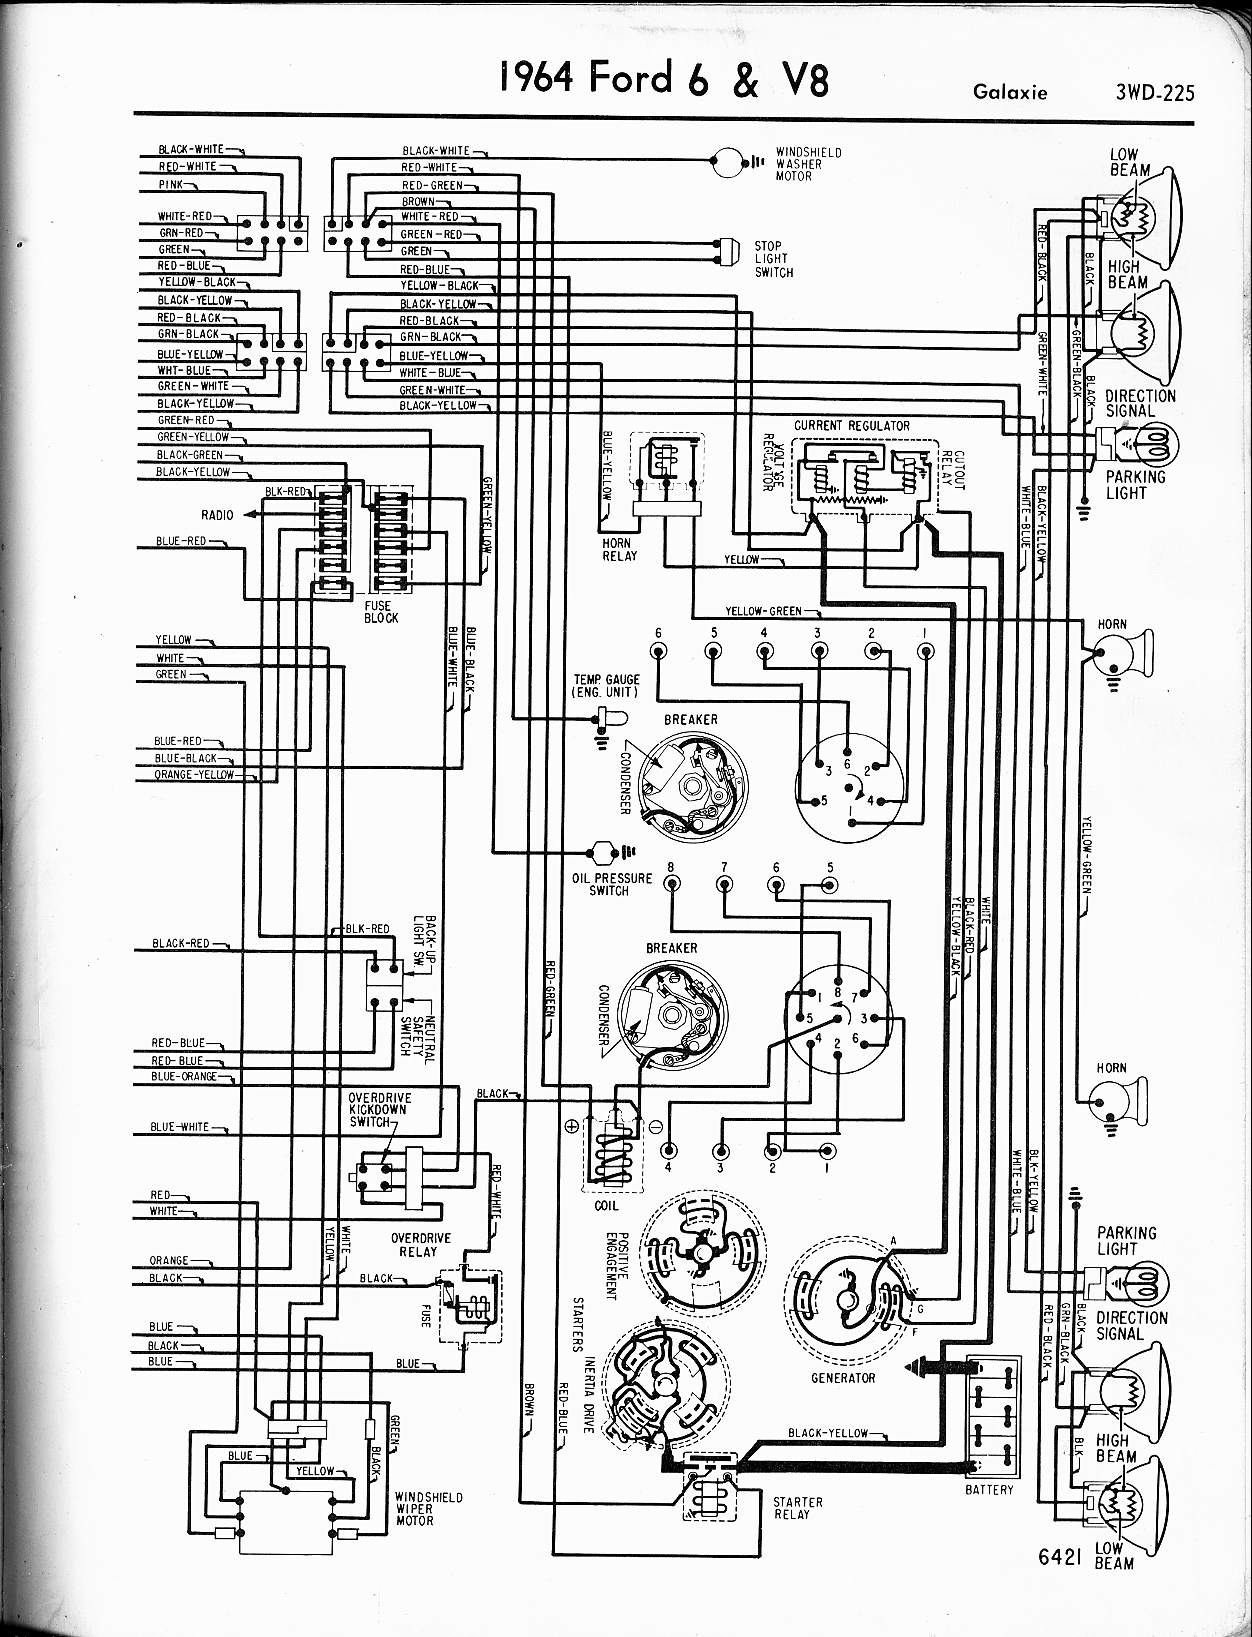 2004 Ford F150 Stereo Wiring Diagram from www.oldcarmanualproject.com